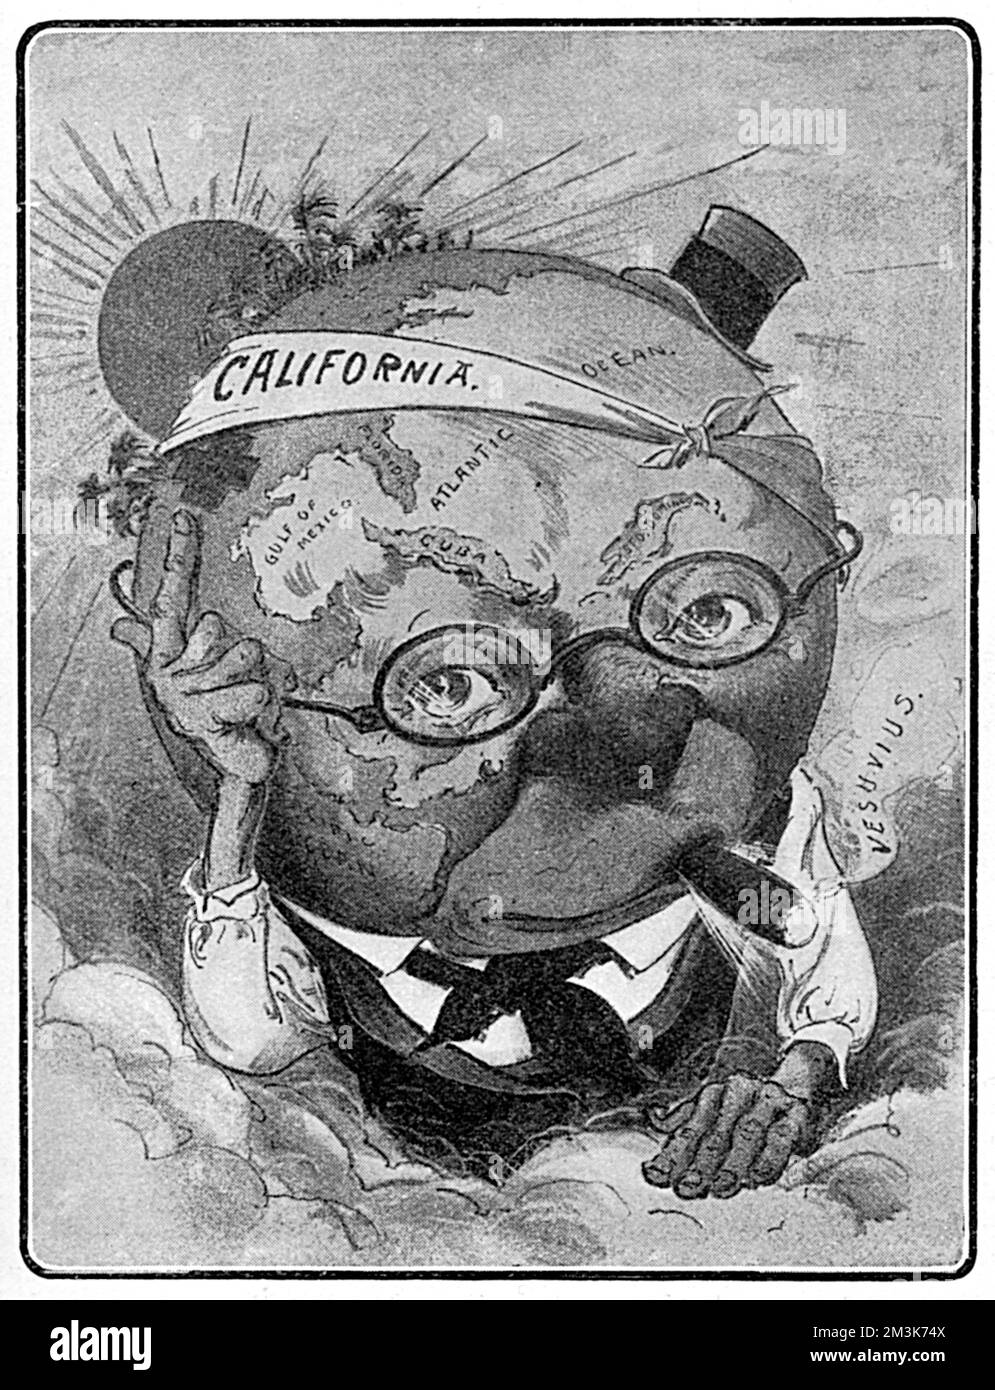 Cartoon showing a globe-headed American character nursing his bandaged head; a humorous look at the effects of the San Francisco earthquake on the American economy. Originally published in 'Judge', the well-known American paper. The earthquake occurred on the 18th April 1906 in San Francisco, California, USA which lies across the San Andreas Fault.  Measuring 7.9 on the richter scale, the earthquake and subsequent fires resulted in the loss of 3000 lives and over 300,000 homes.     Date: 6th June 1906 Stock Photo